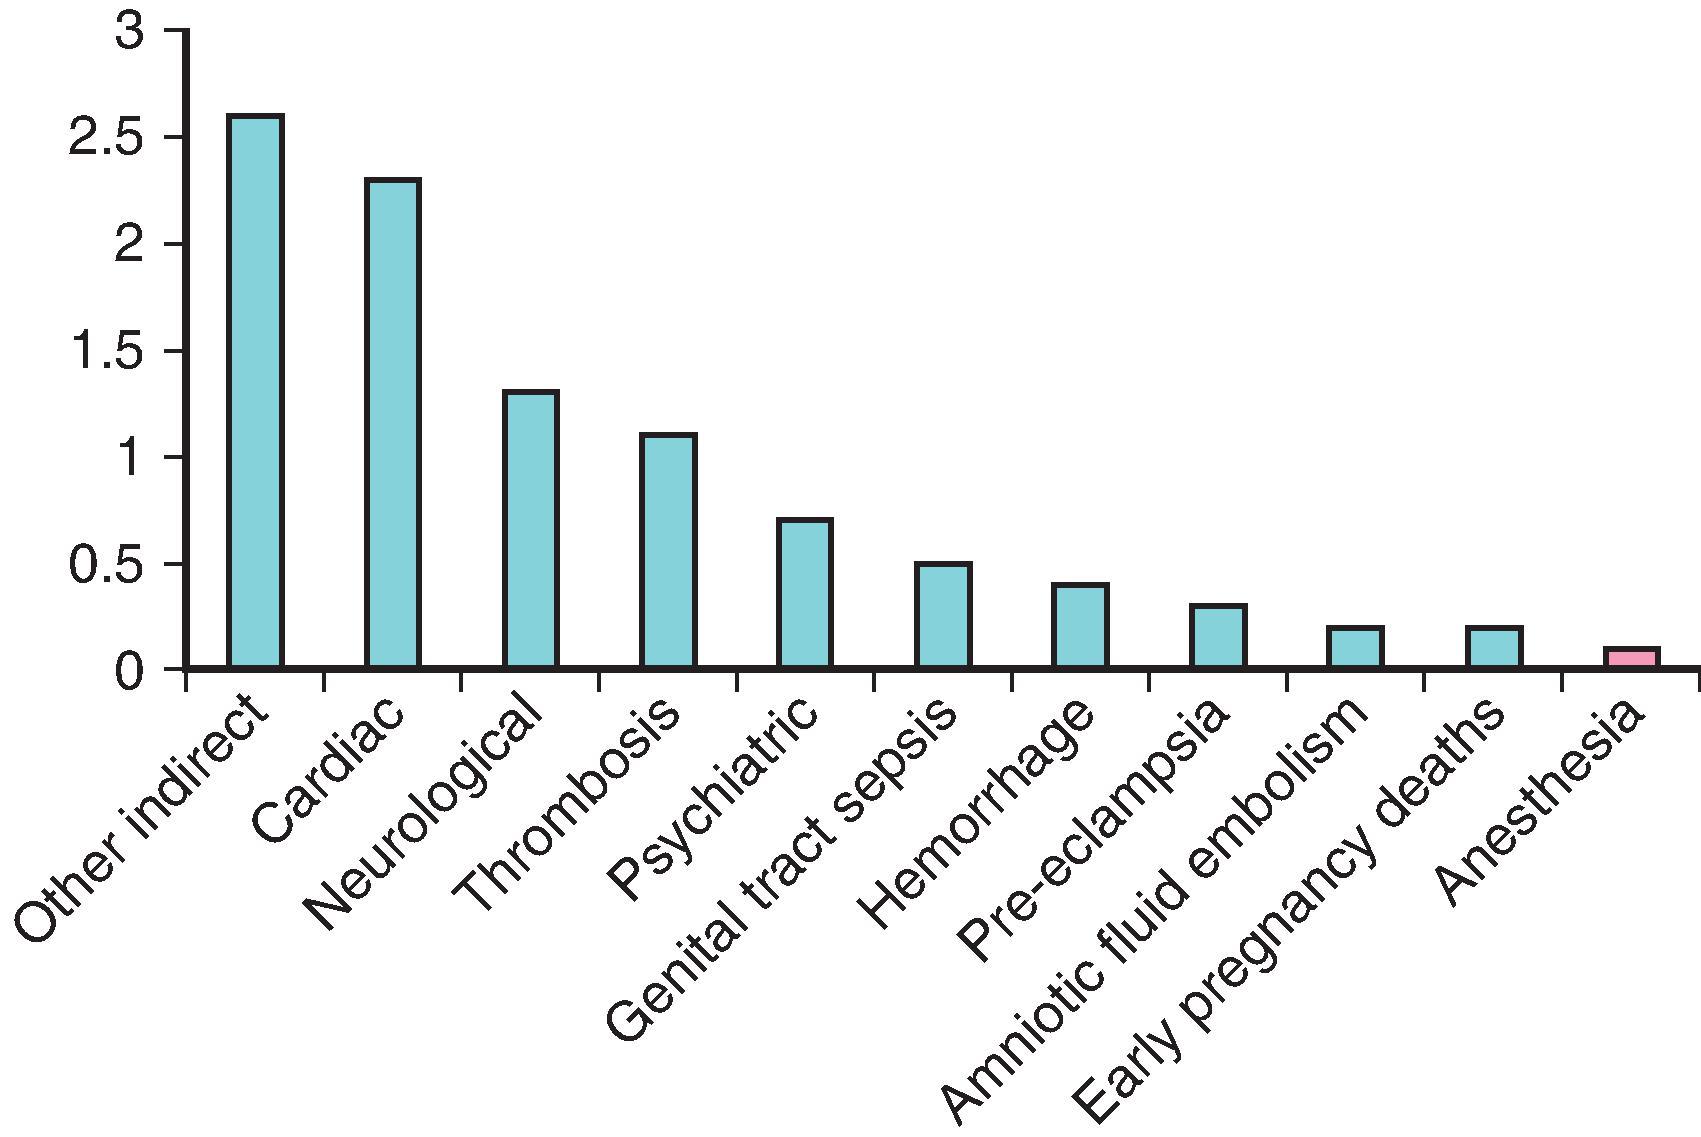 Fig. 37.2, Leading causes of maternal deaths in United Kingdom 2009–2012). (Reproduced with permission from Freedman RL, Lucas DN. MBRRACE-UK: saving lives, improving mothers’ care – implications for anaesthetists. Int J Obstet Anesth. 2015;24(2):161–173.)